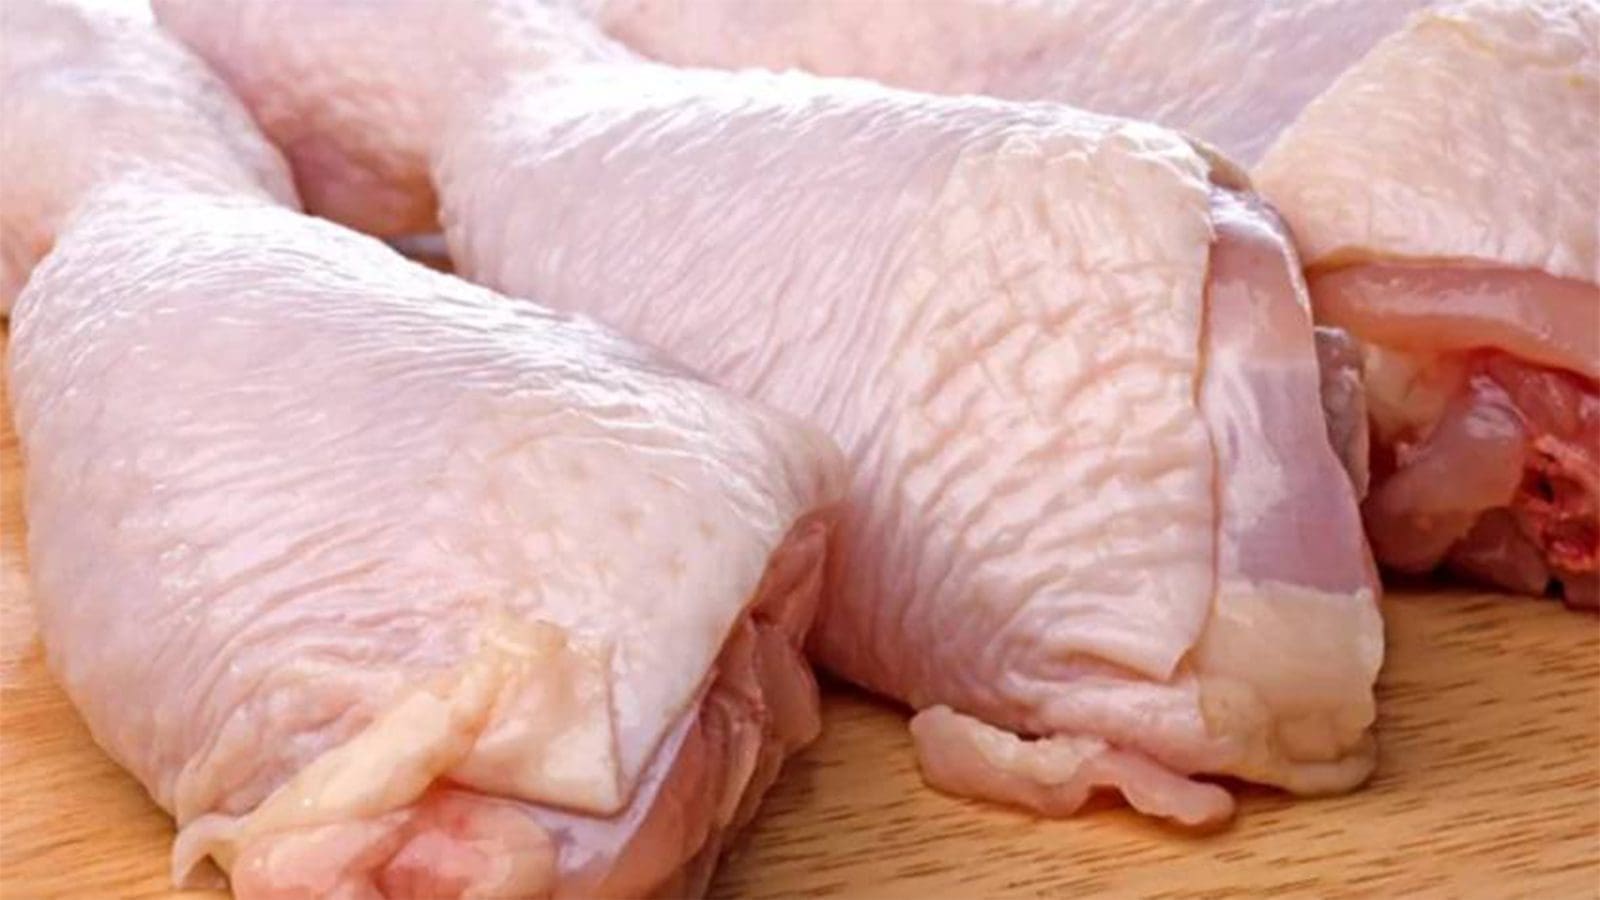 Raw pork, chicken meat sold in Kenyan supermarkets is contaminated: KEMRI research finds